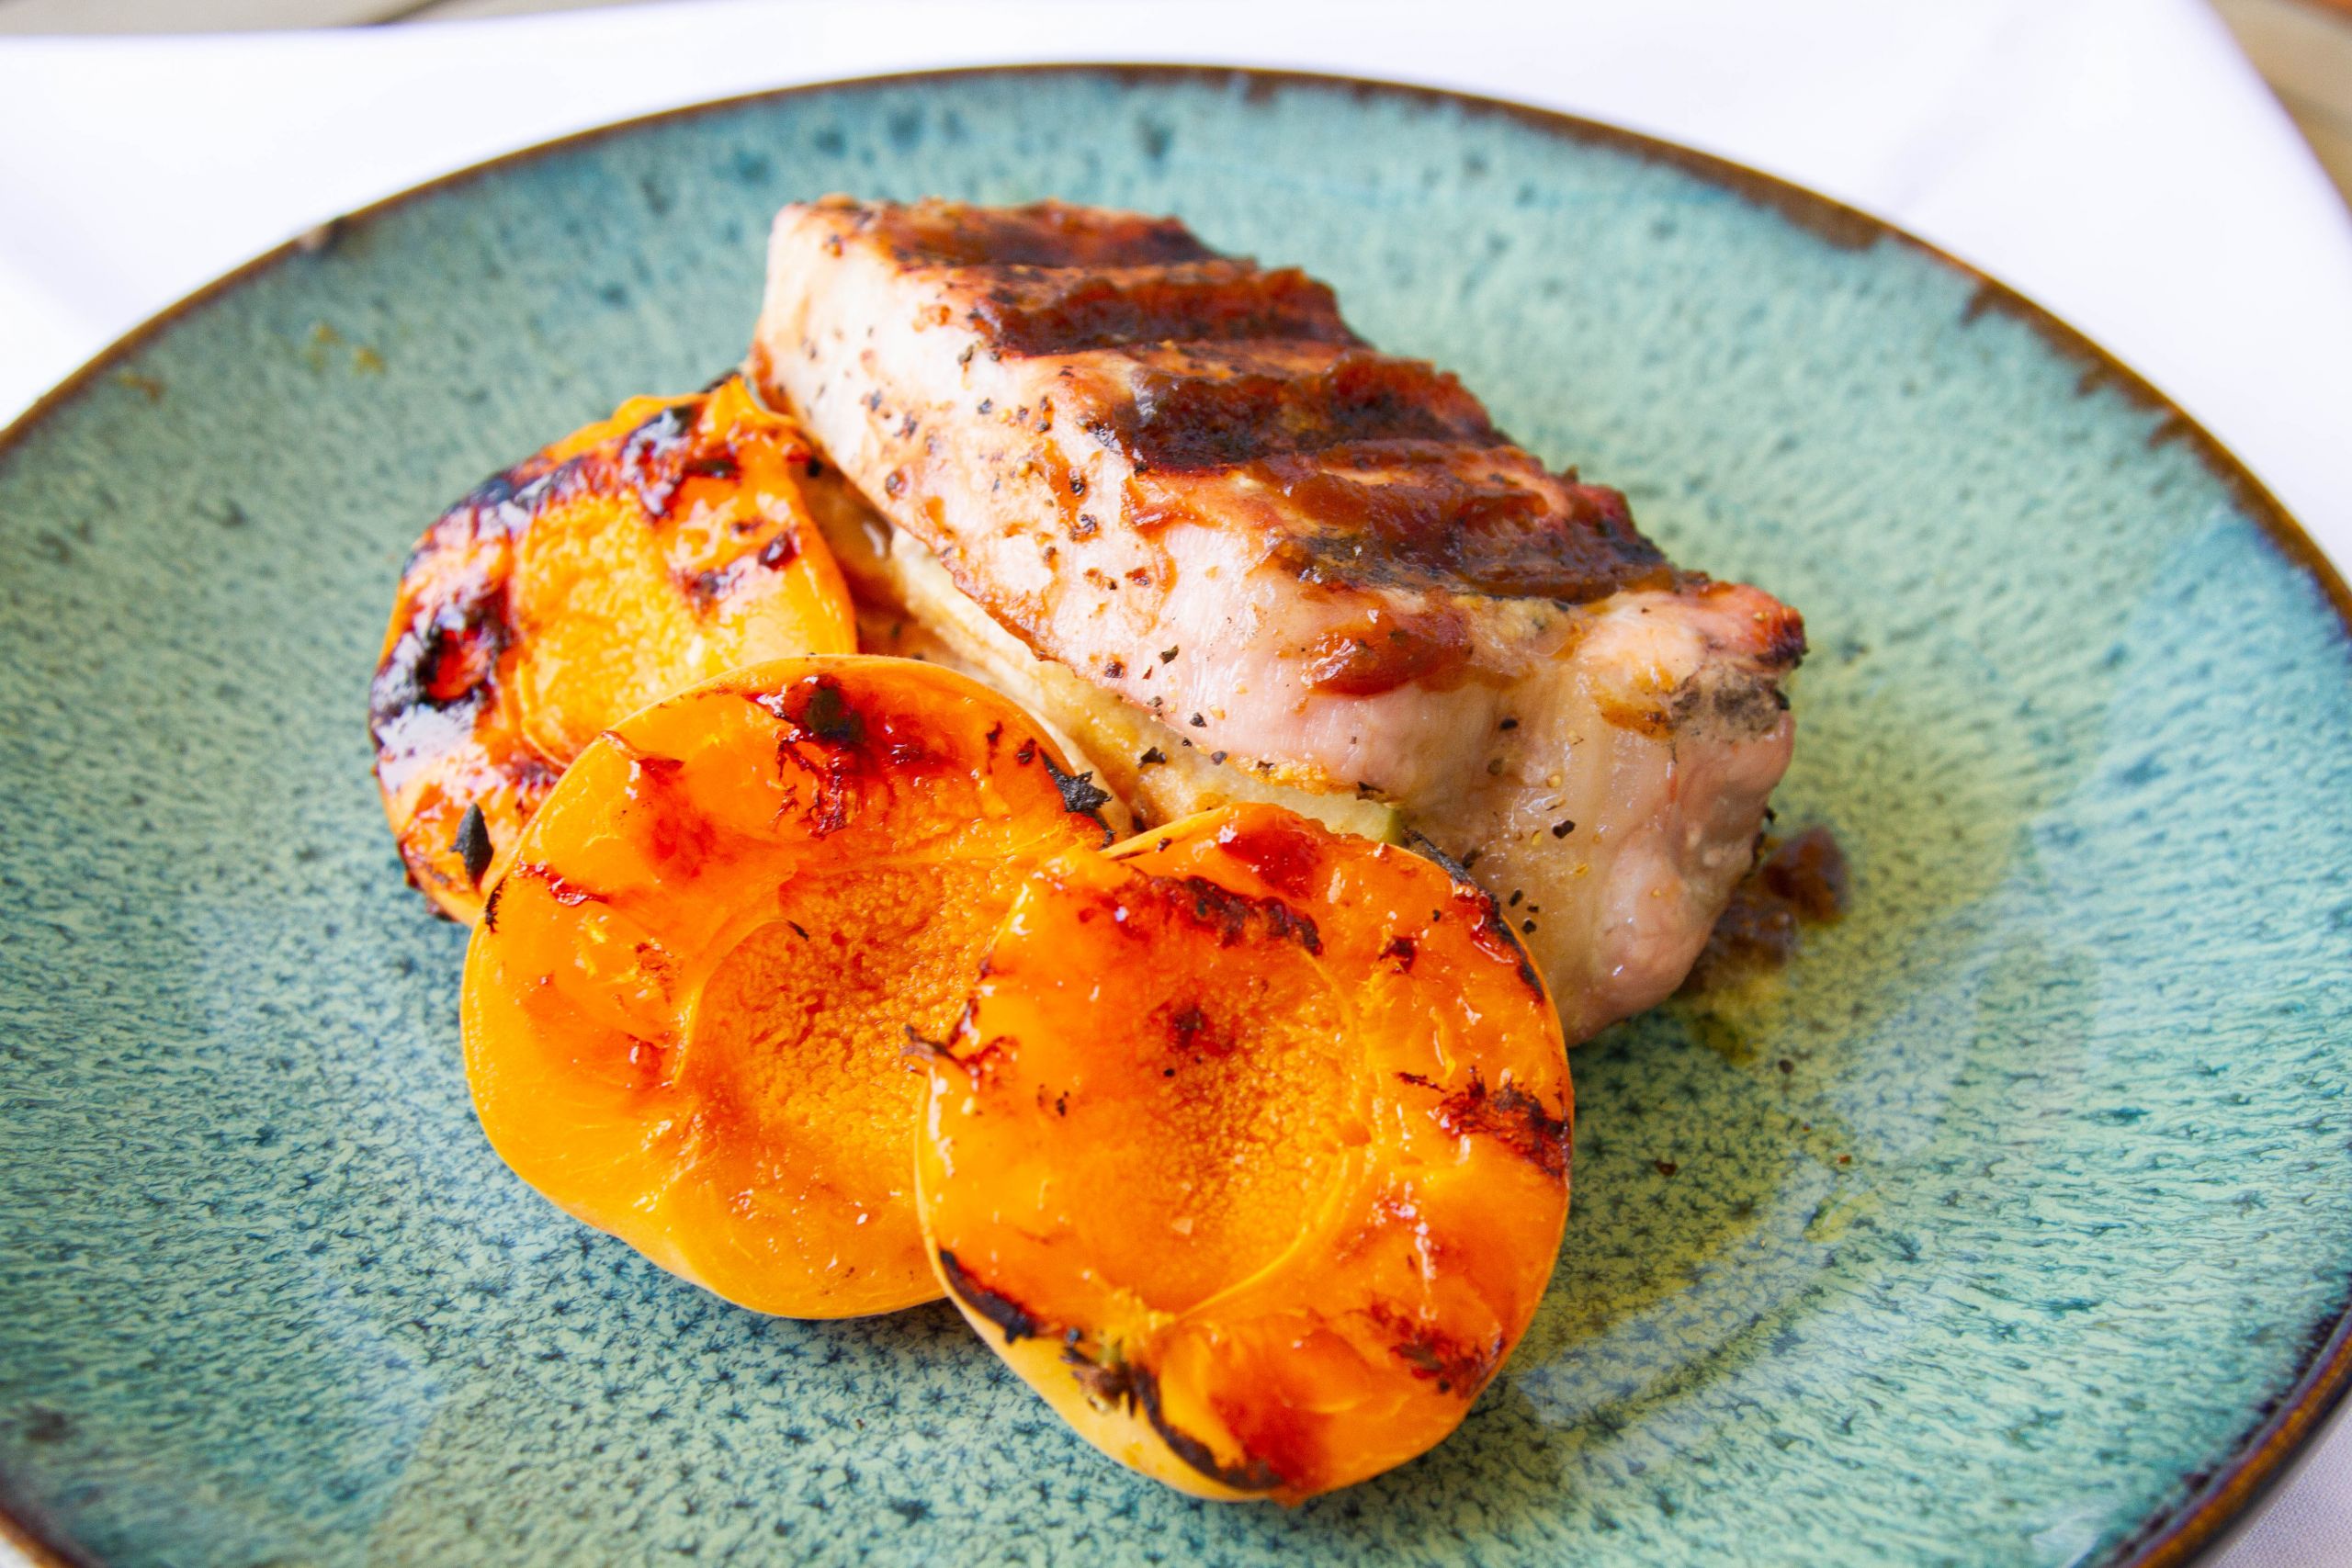 Pork Chops Grilled Temperature Lovely Grilled Pork Chops Temperatures and A Recipe